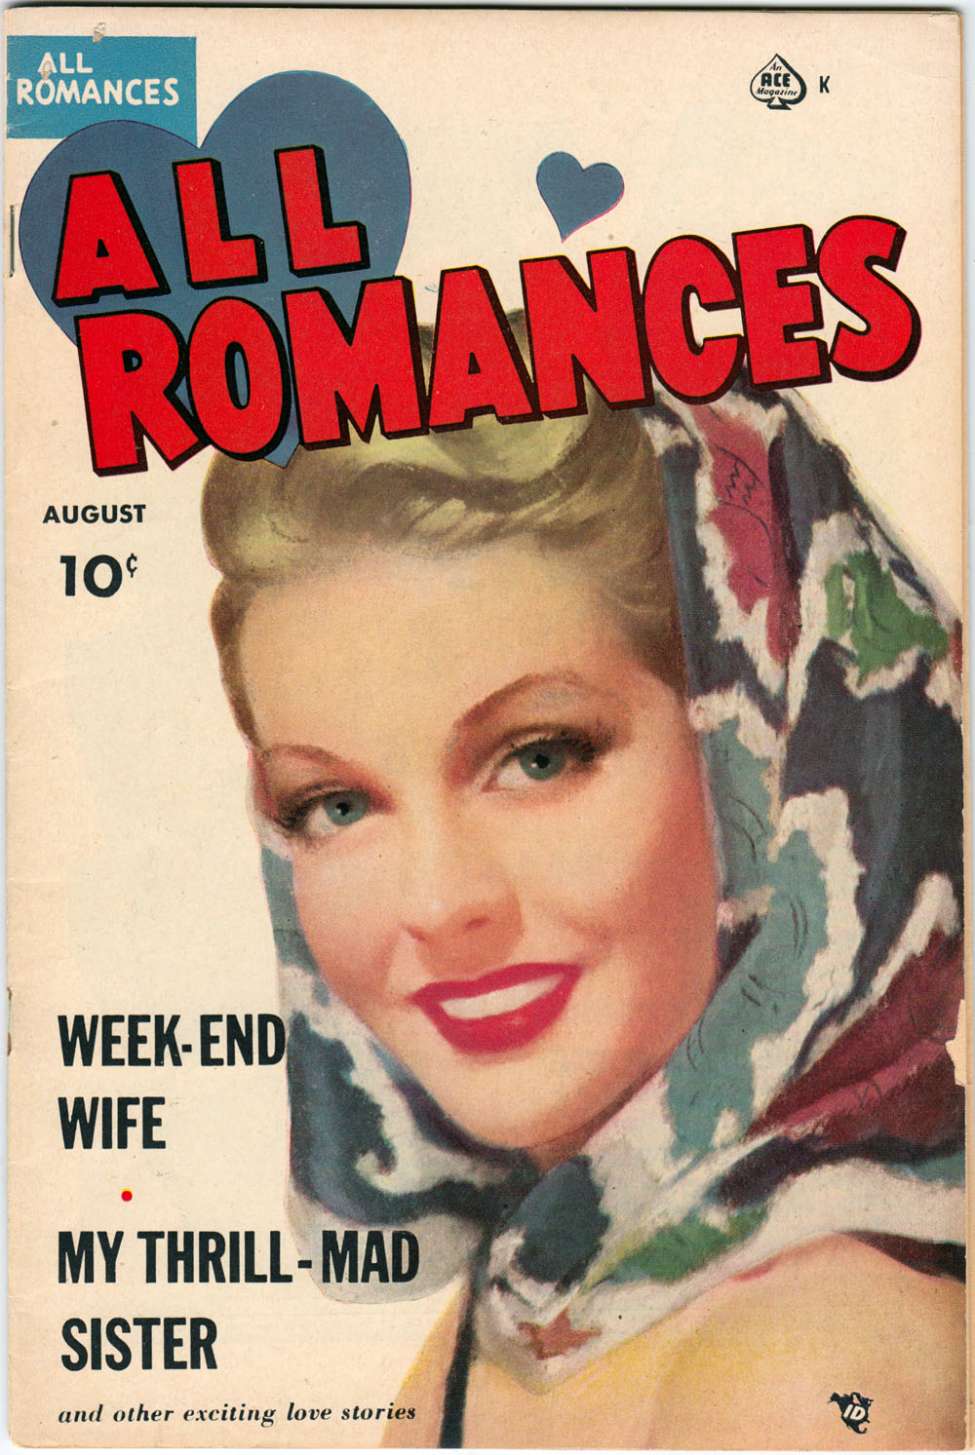 Romances 6. Mad sisters. Weekend wife Ace Magazines.